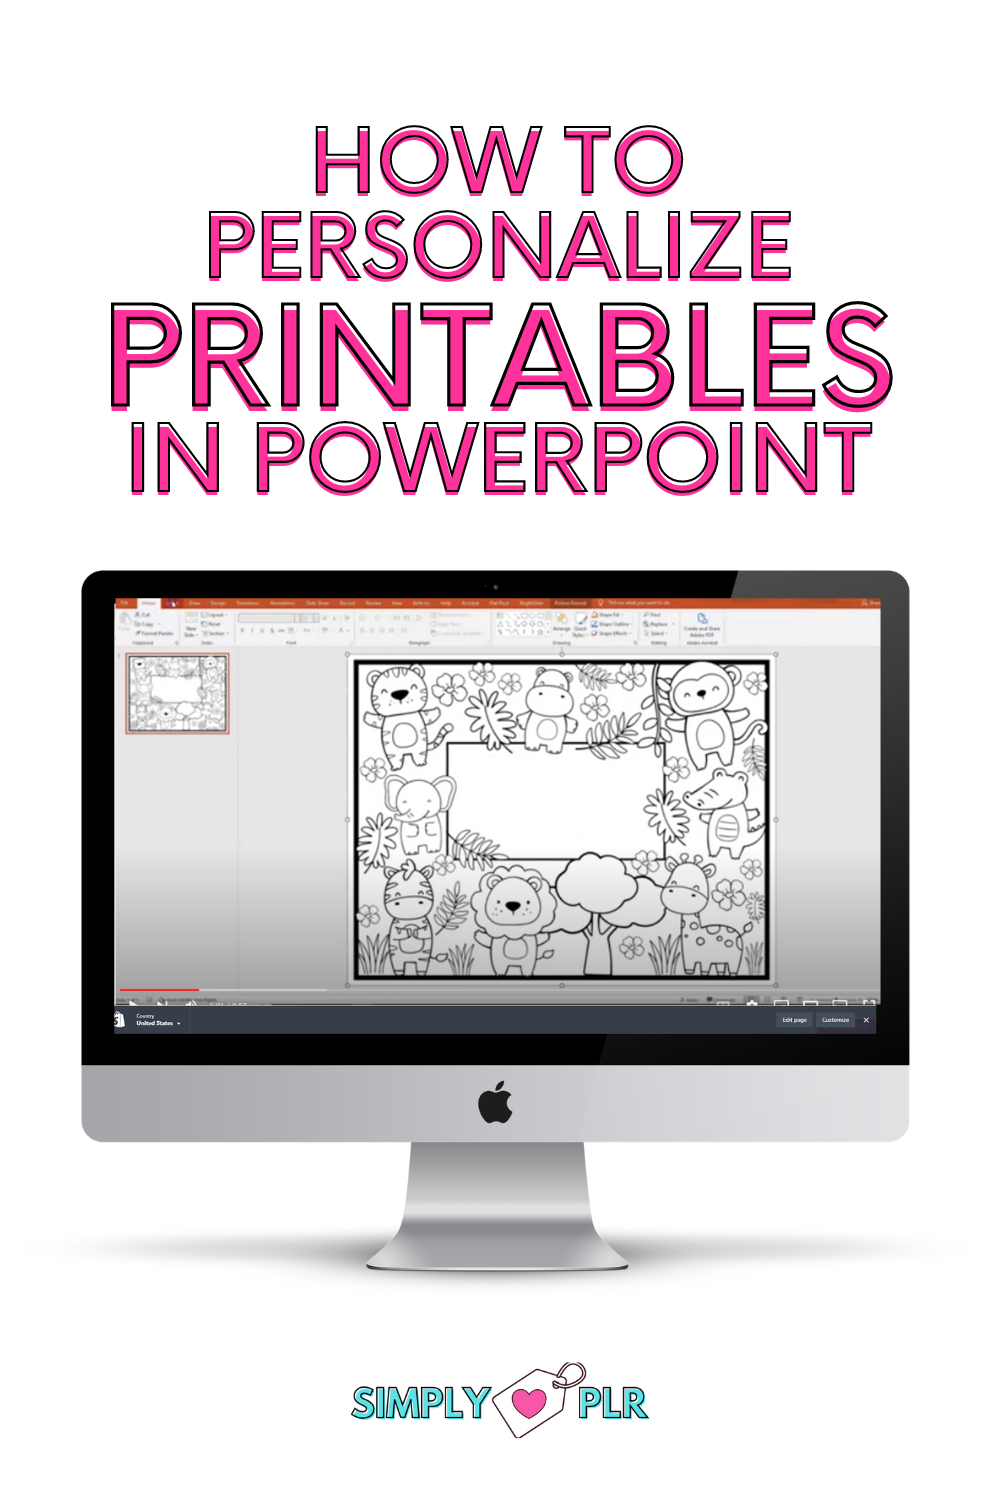 Simply Love PLR How to Personalize Printables With PowerPoint